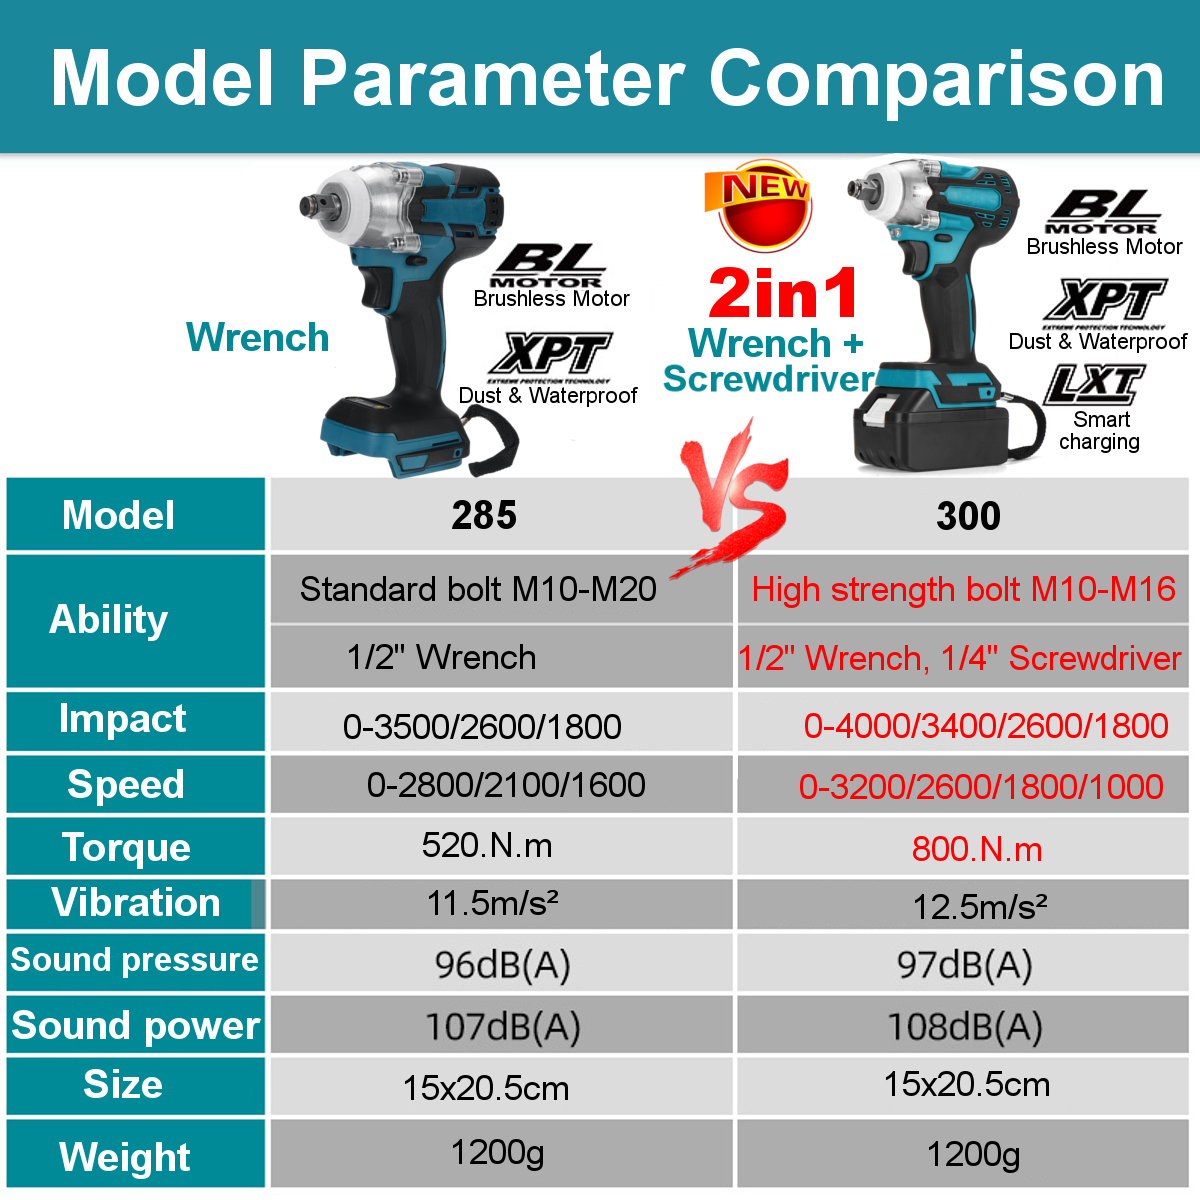 Drillpro-2-in1-18V-800Nm-Electric-Wrench-Screwdriver-Brushless-Cordless-Electric-12Wrench-14Screwdri-1806148-11